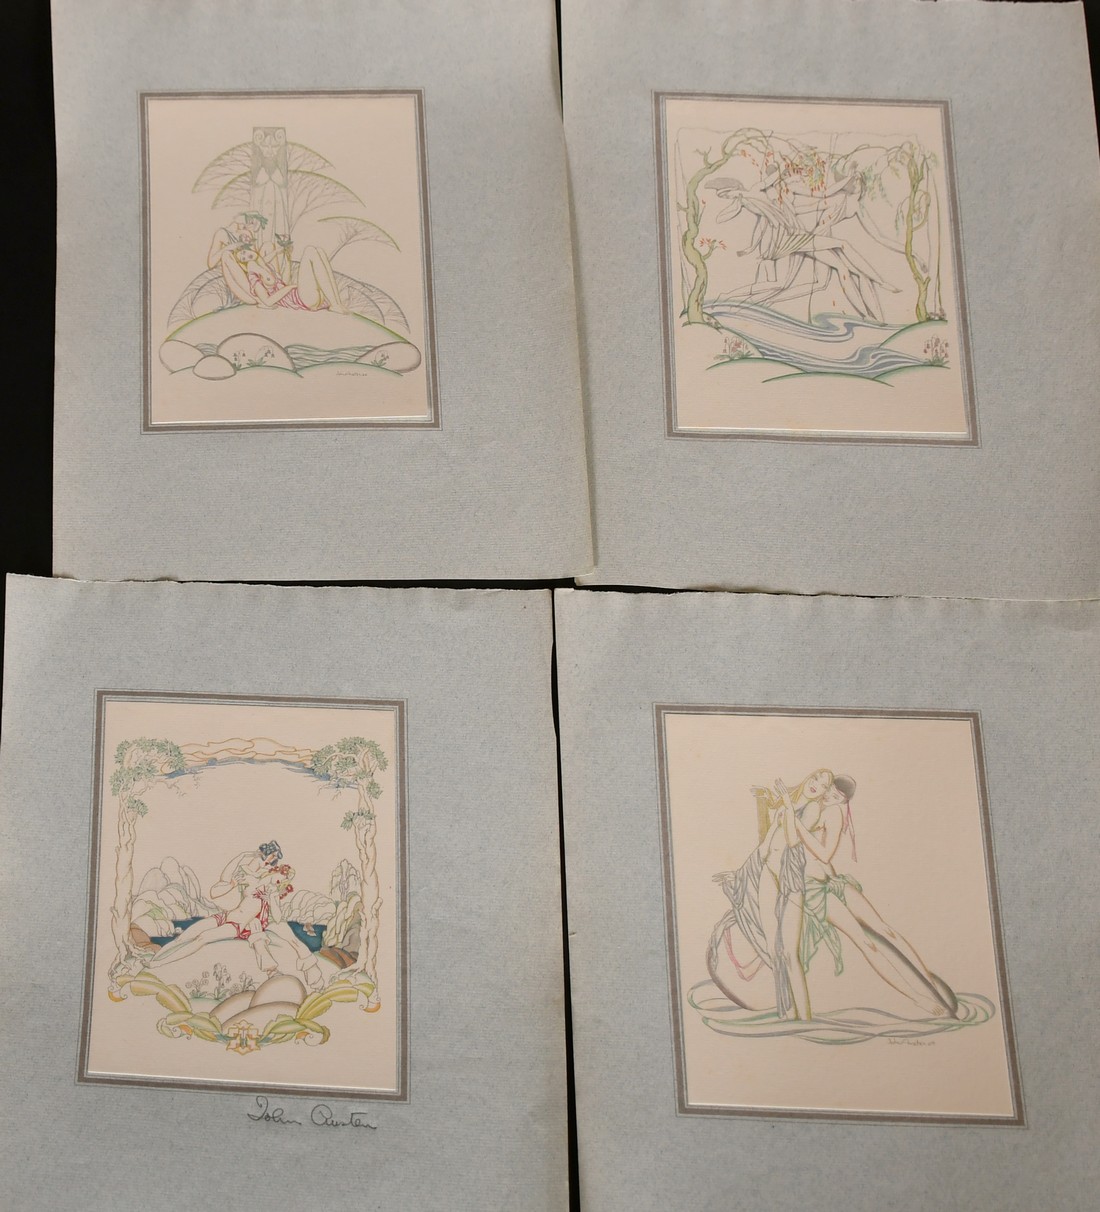 John Austen, A collection of twelve semi-erotic prints, one signed in pencil on the mount, 7" x 5.